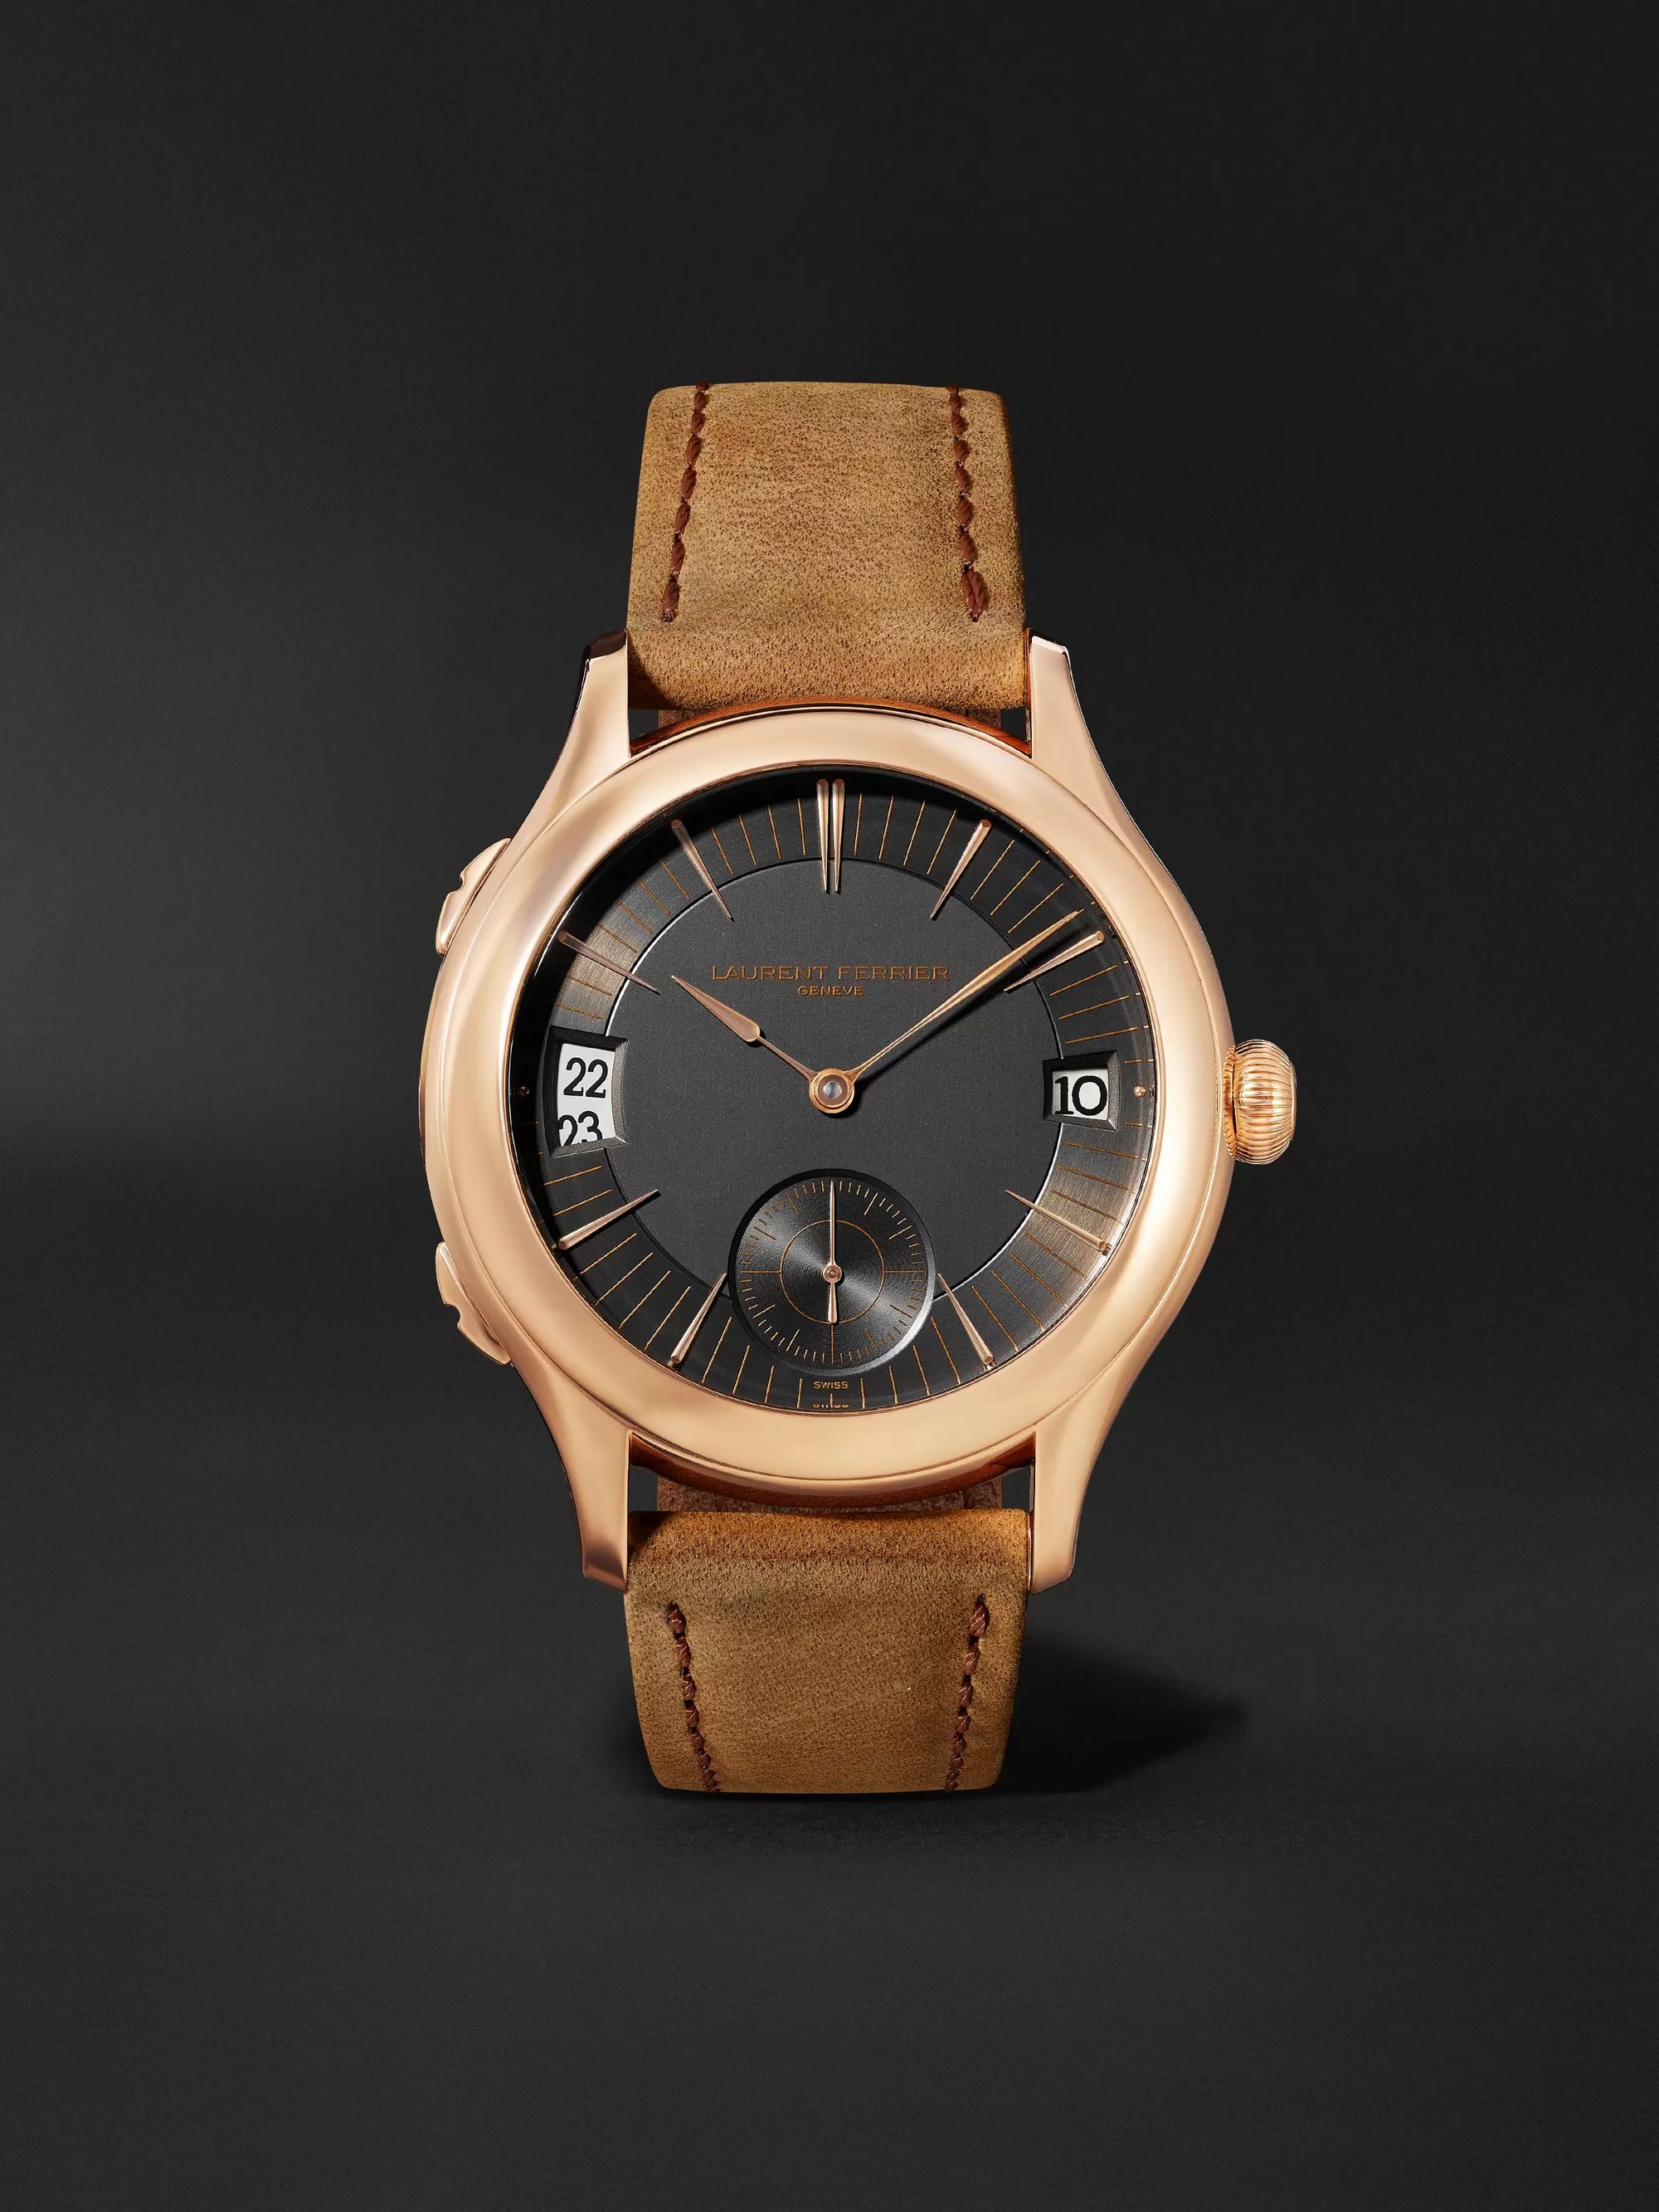 Laurent Ferrier Traveller Automatic 41mm 18-Karat Red Gold and Leather Watch, Ref. No. LCF007.R5.AR1.1